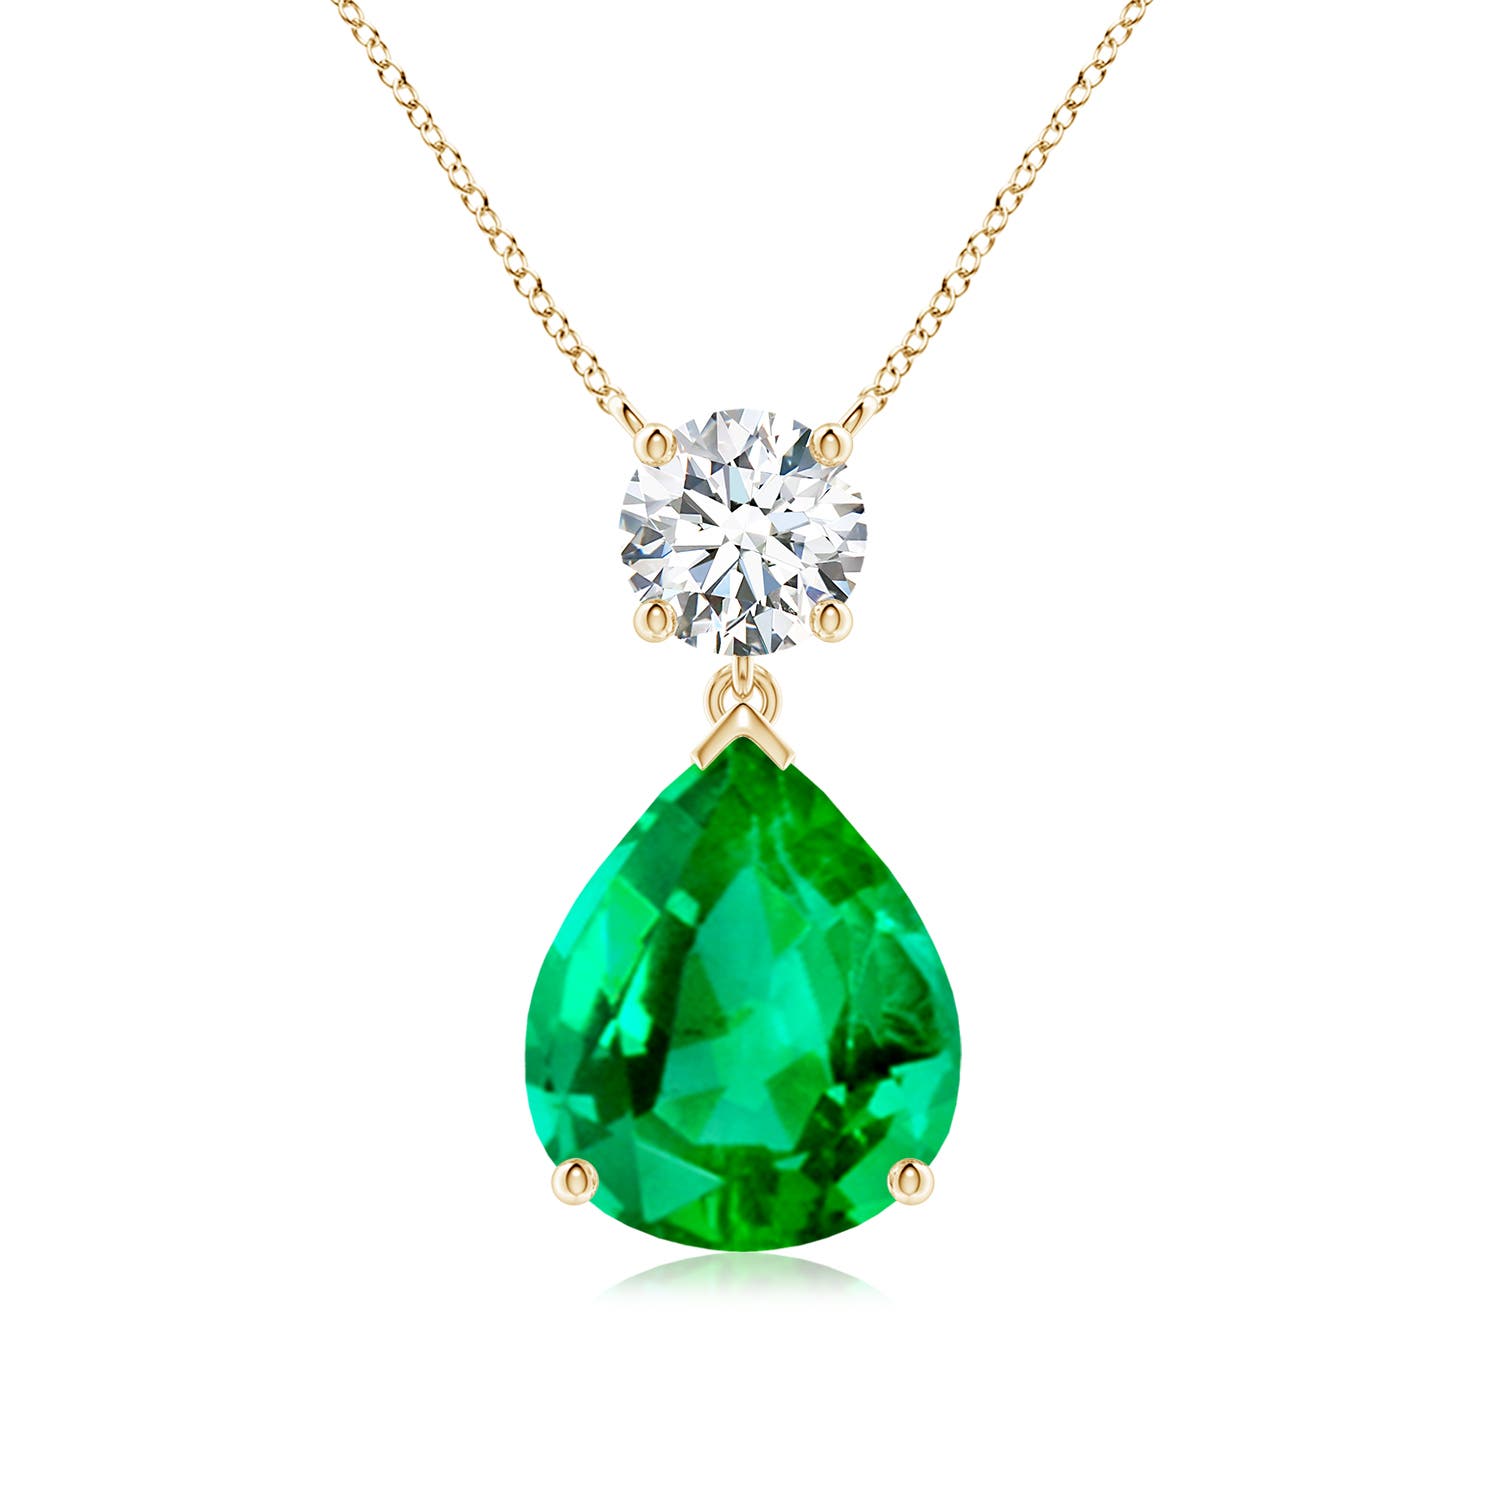 AAA - Emerald / 5.21 CT / 18 KT Yellow Gold